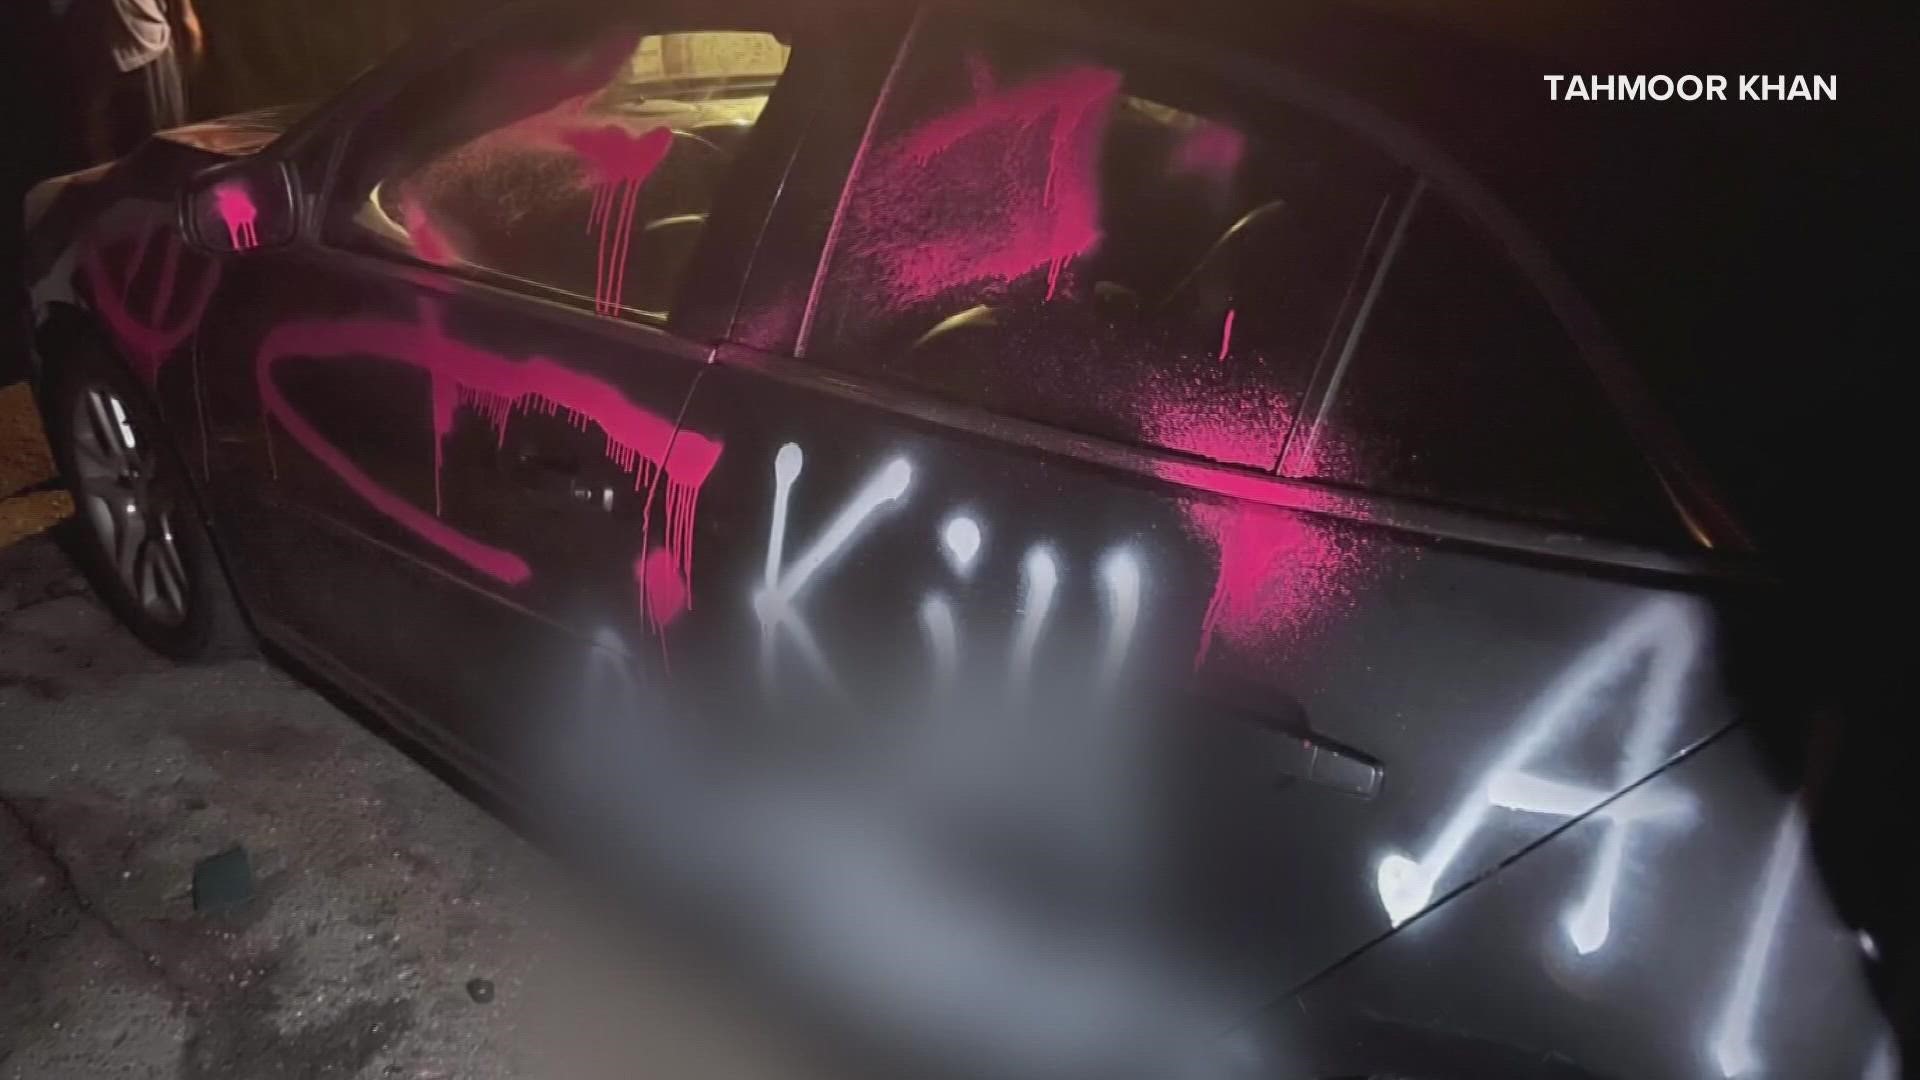 A Pakistani-American man in Bangor alleges that two teenage girls spray-painted his car with racist language on August 20.